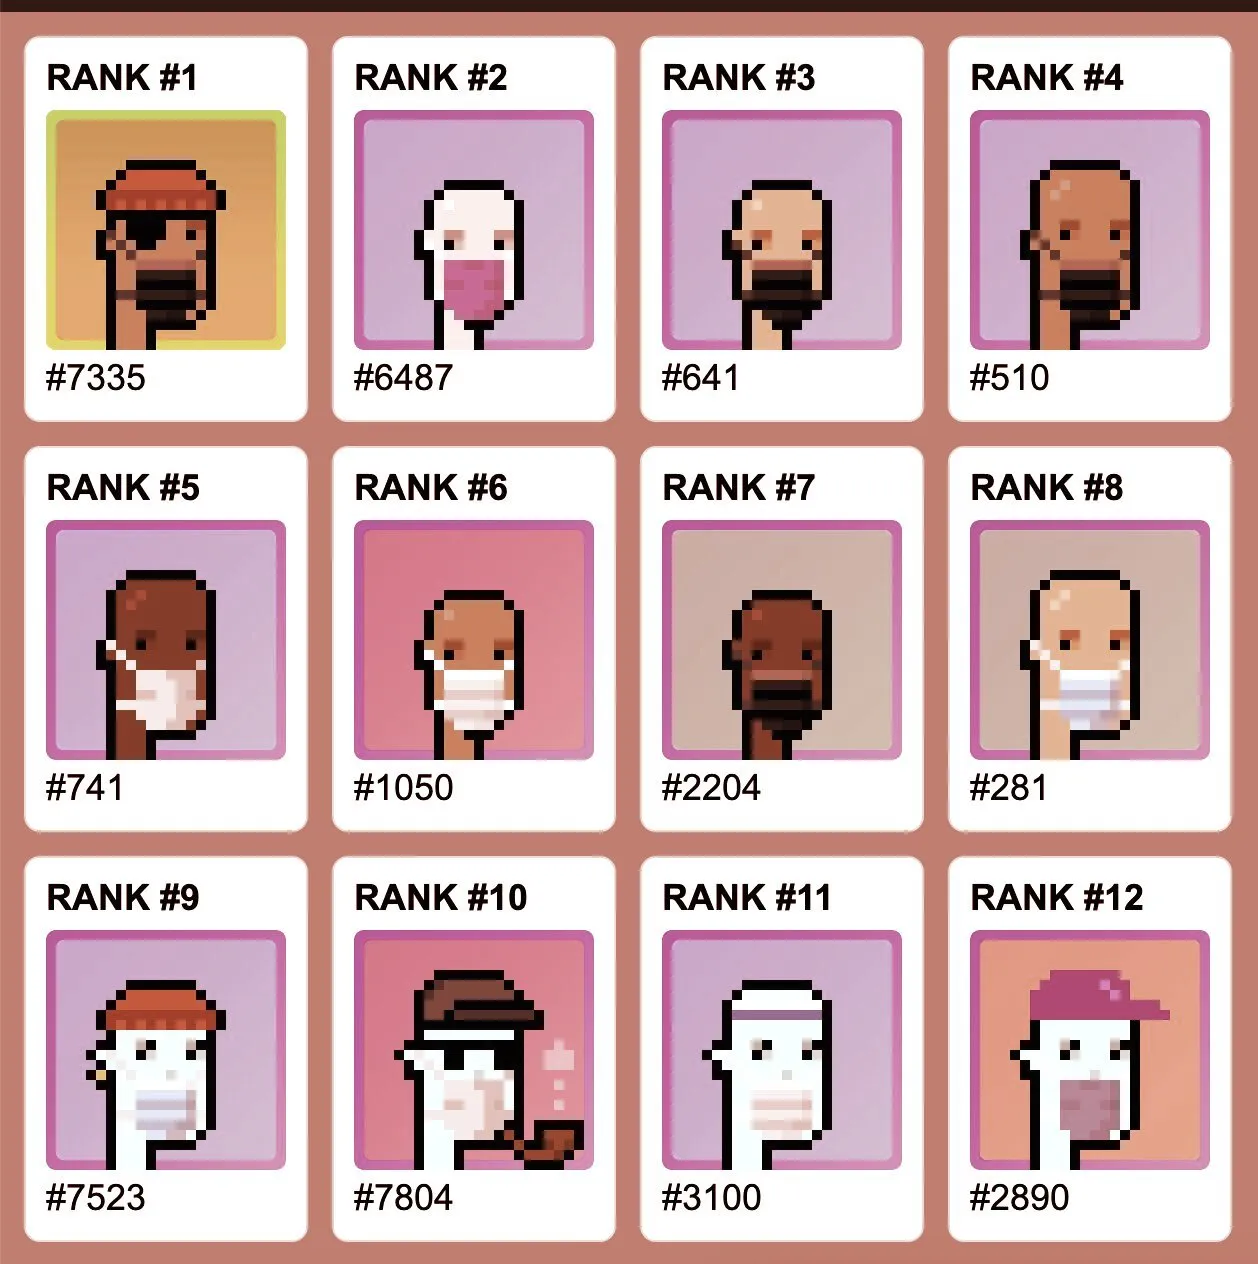 COVIDPunks draw heavily from the original CryptoPunks NFTs. Image: Shutterstock